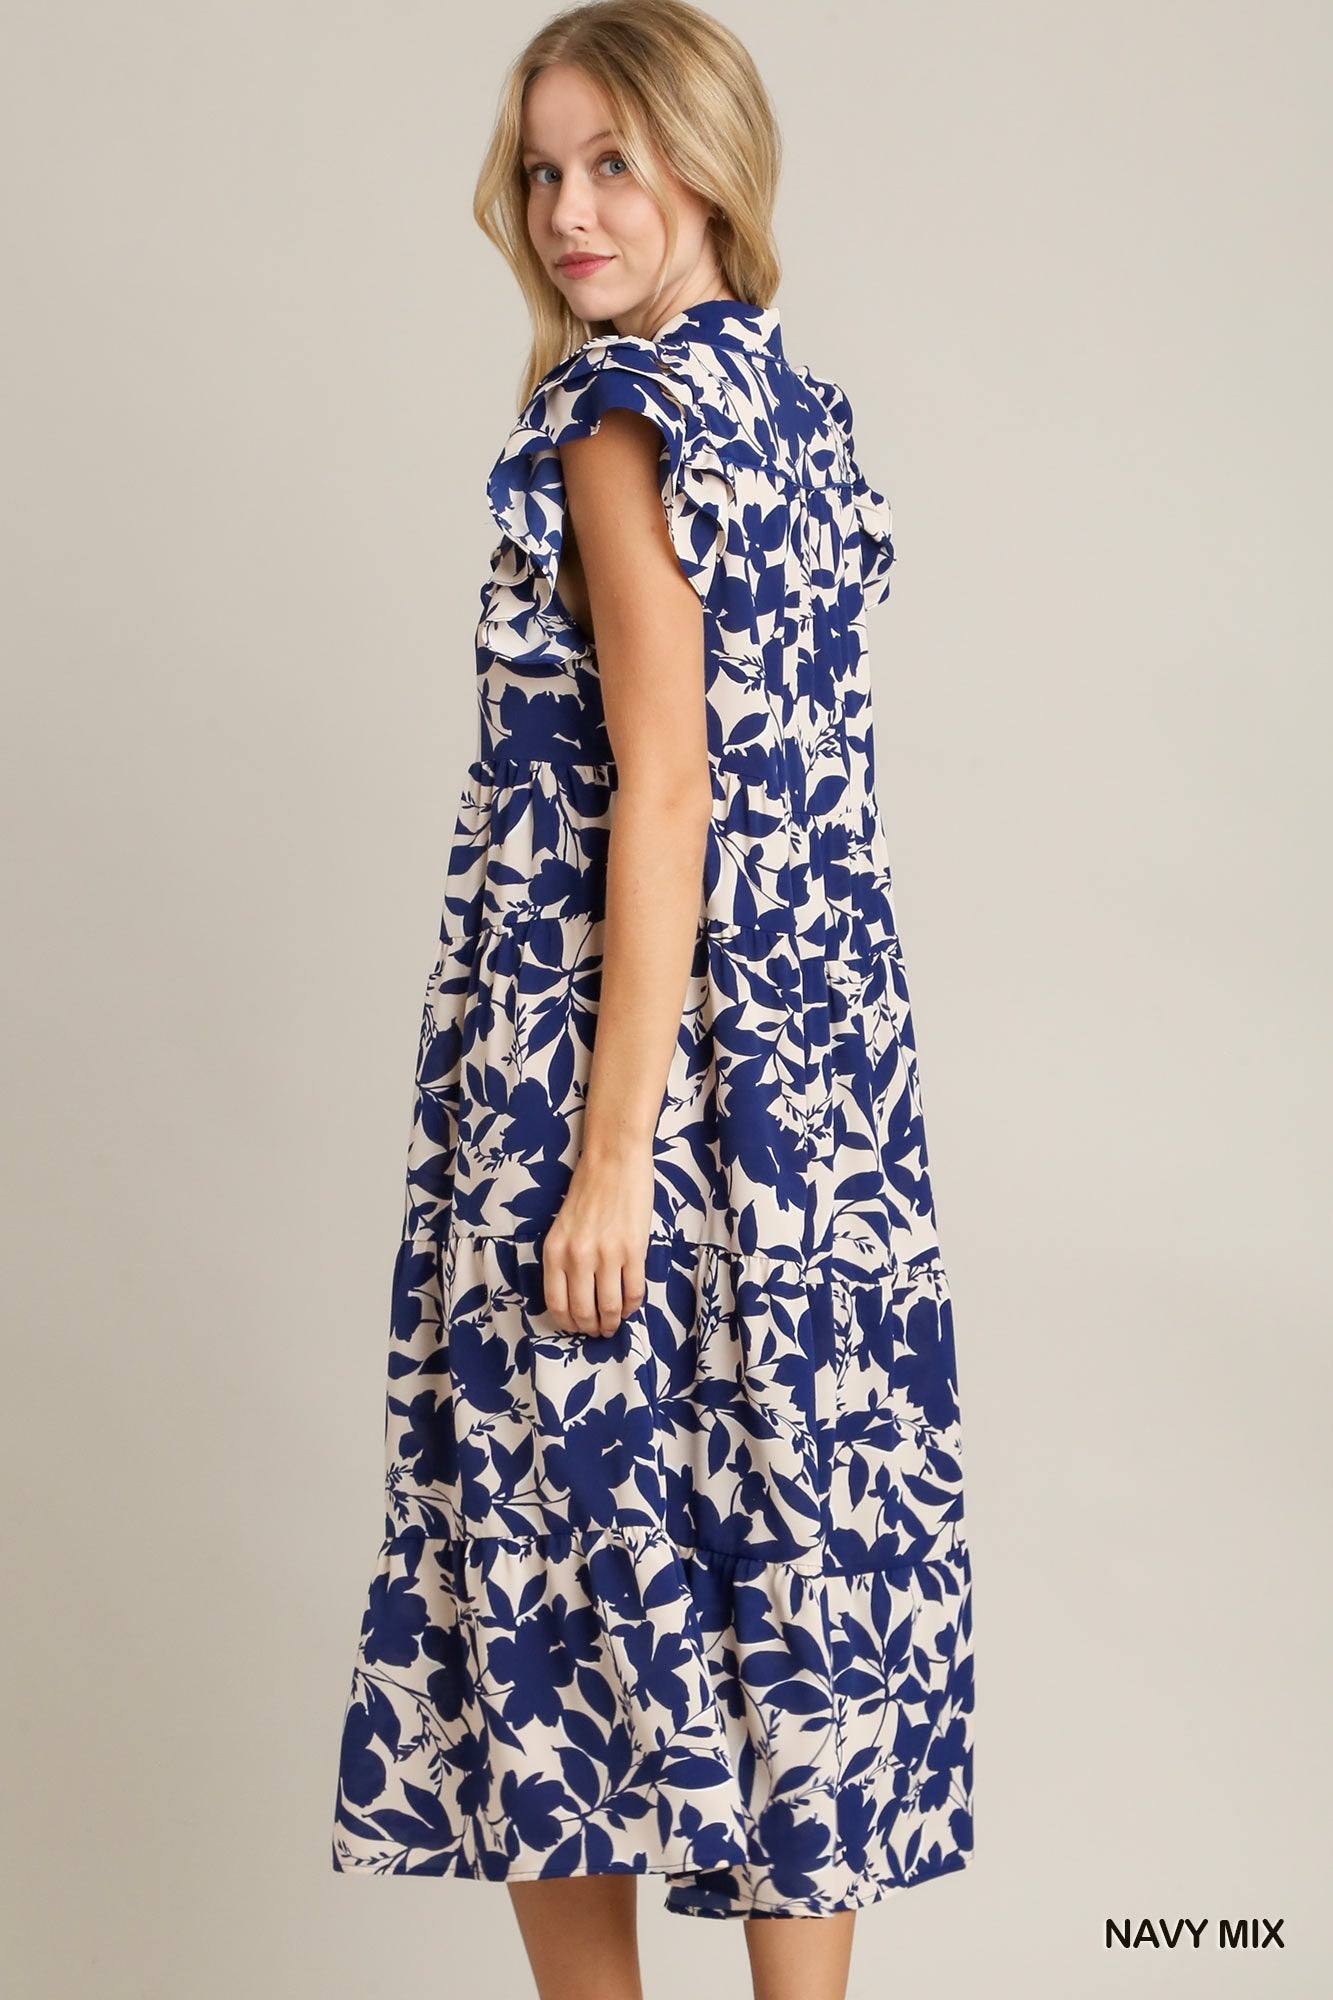 Two Tone A-Line Floral Print Collared Tiered Dress with Ruffle Sleeves